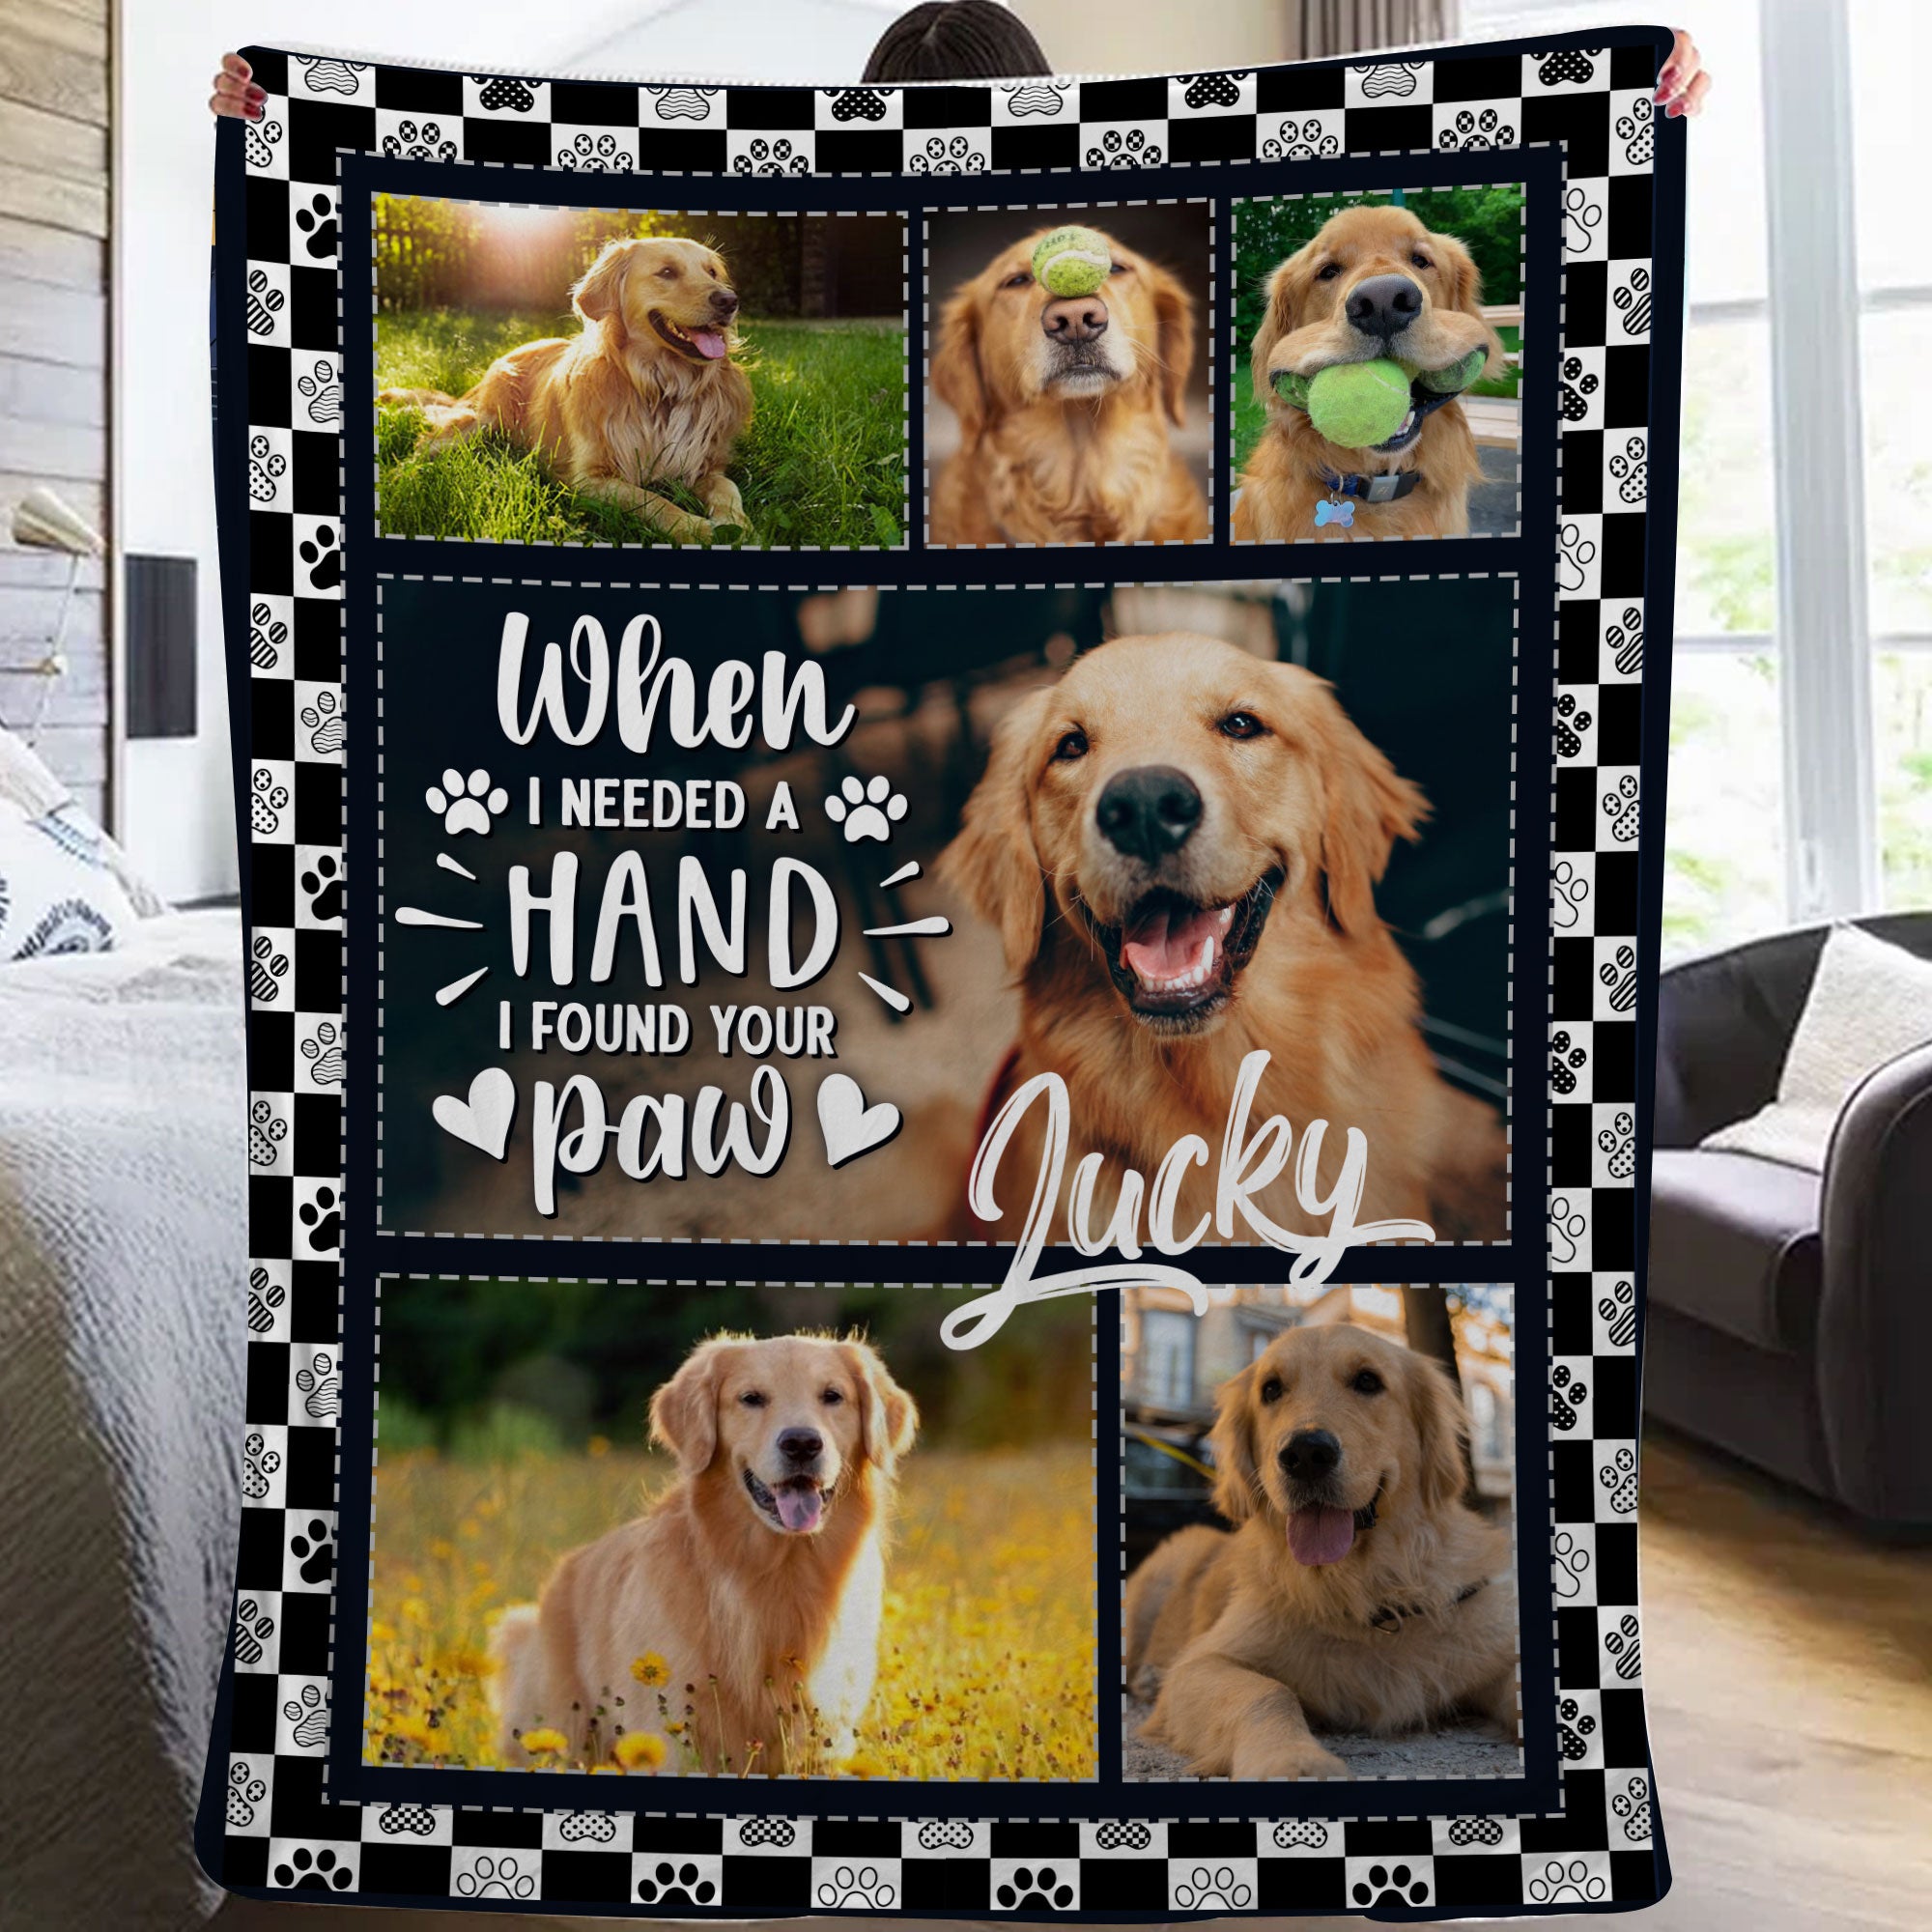 When I Needed A Hand I Found Your Paw - Custom Photo And Name, Personalized Fleece Blanket - Gift For Pet Lover